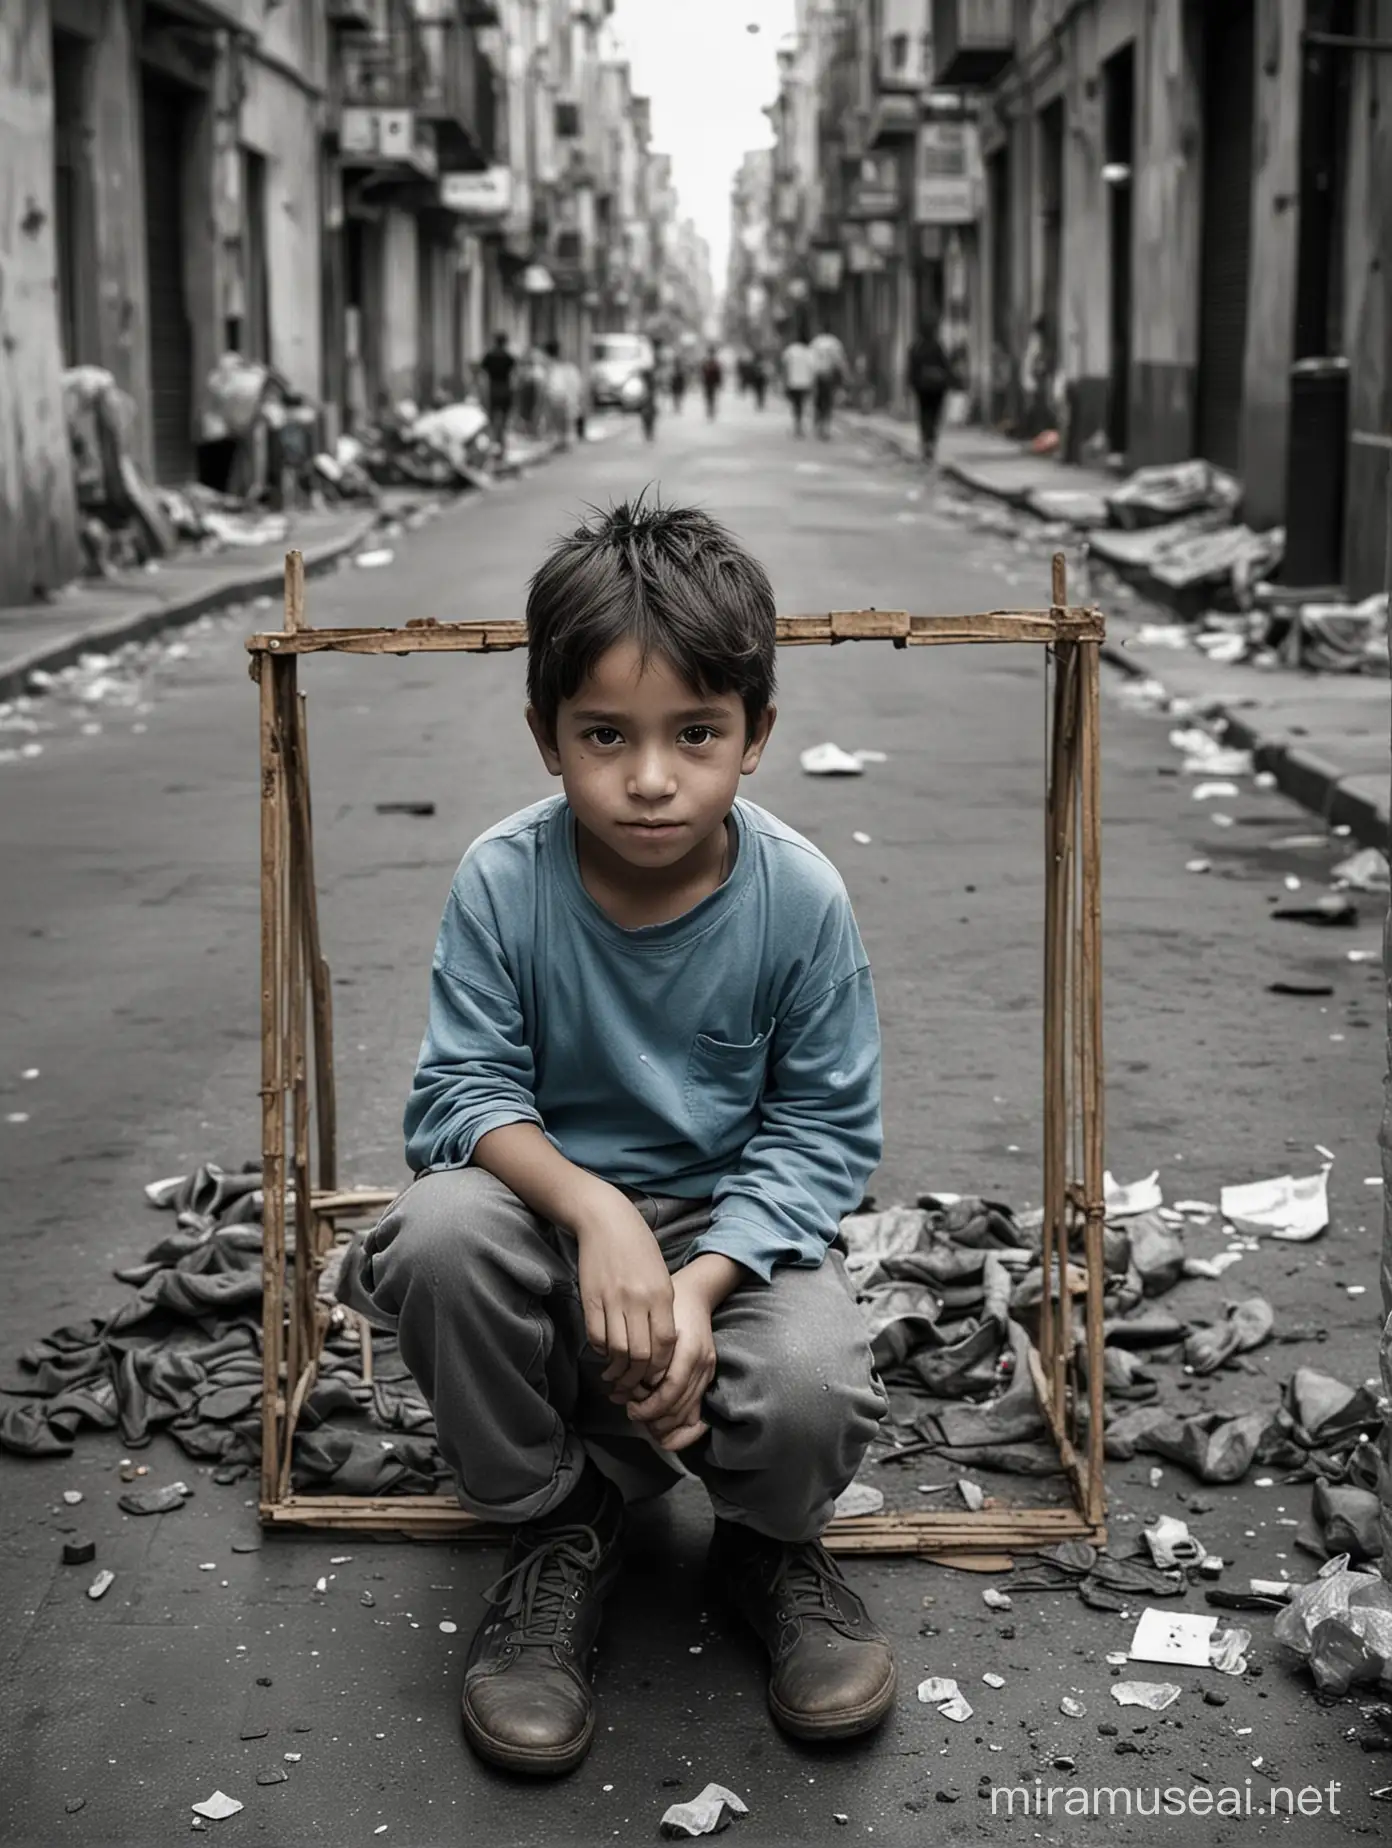 Child Labor and Dreams Resilience Amidst Hardship in Conceptual Art